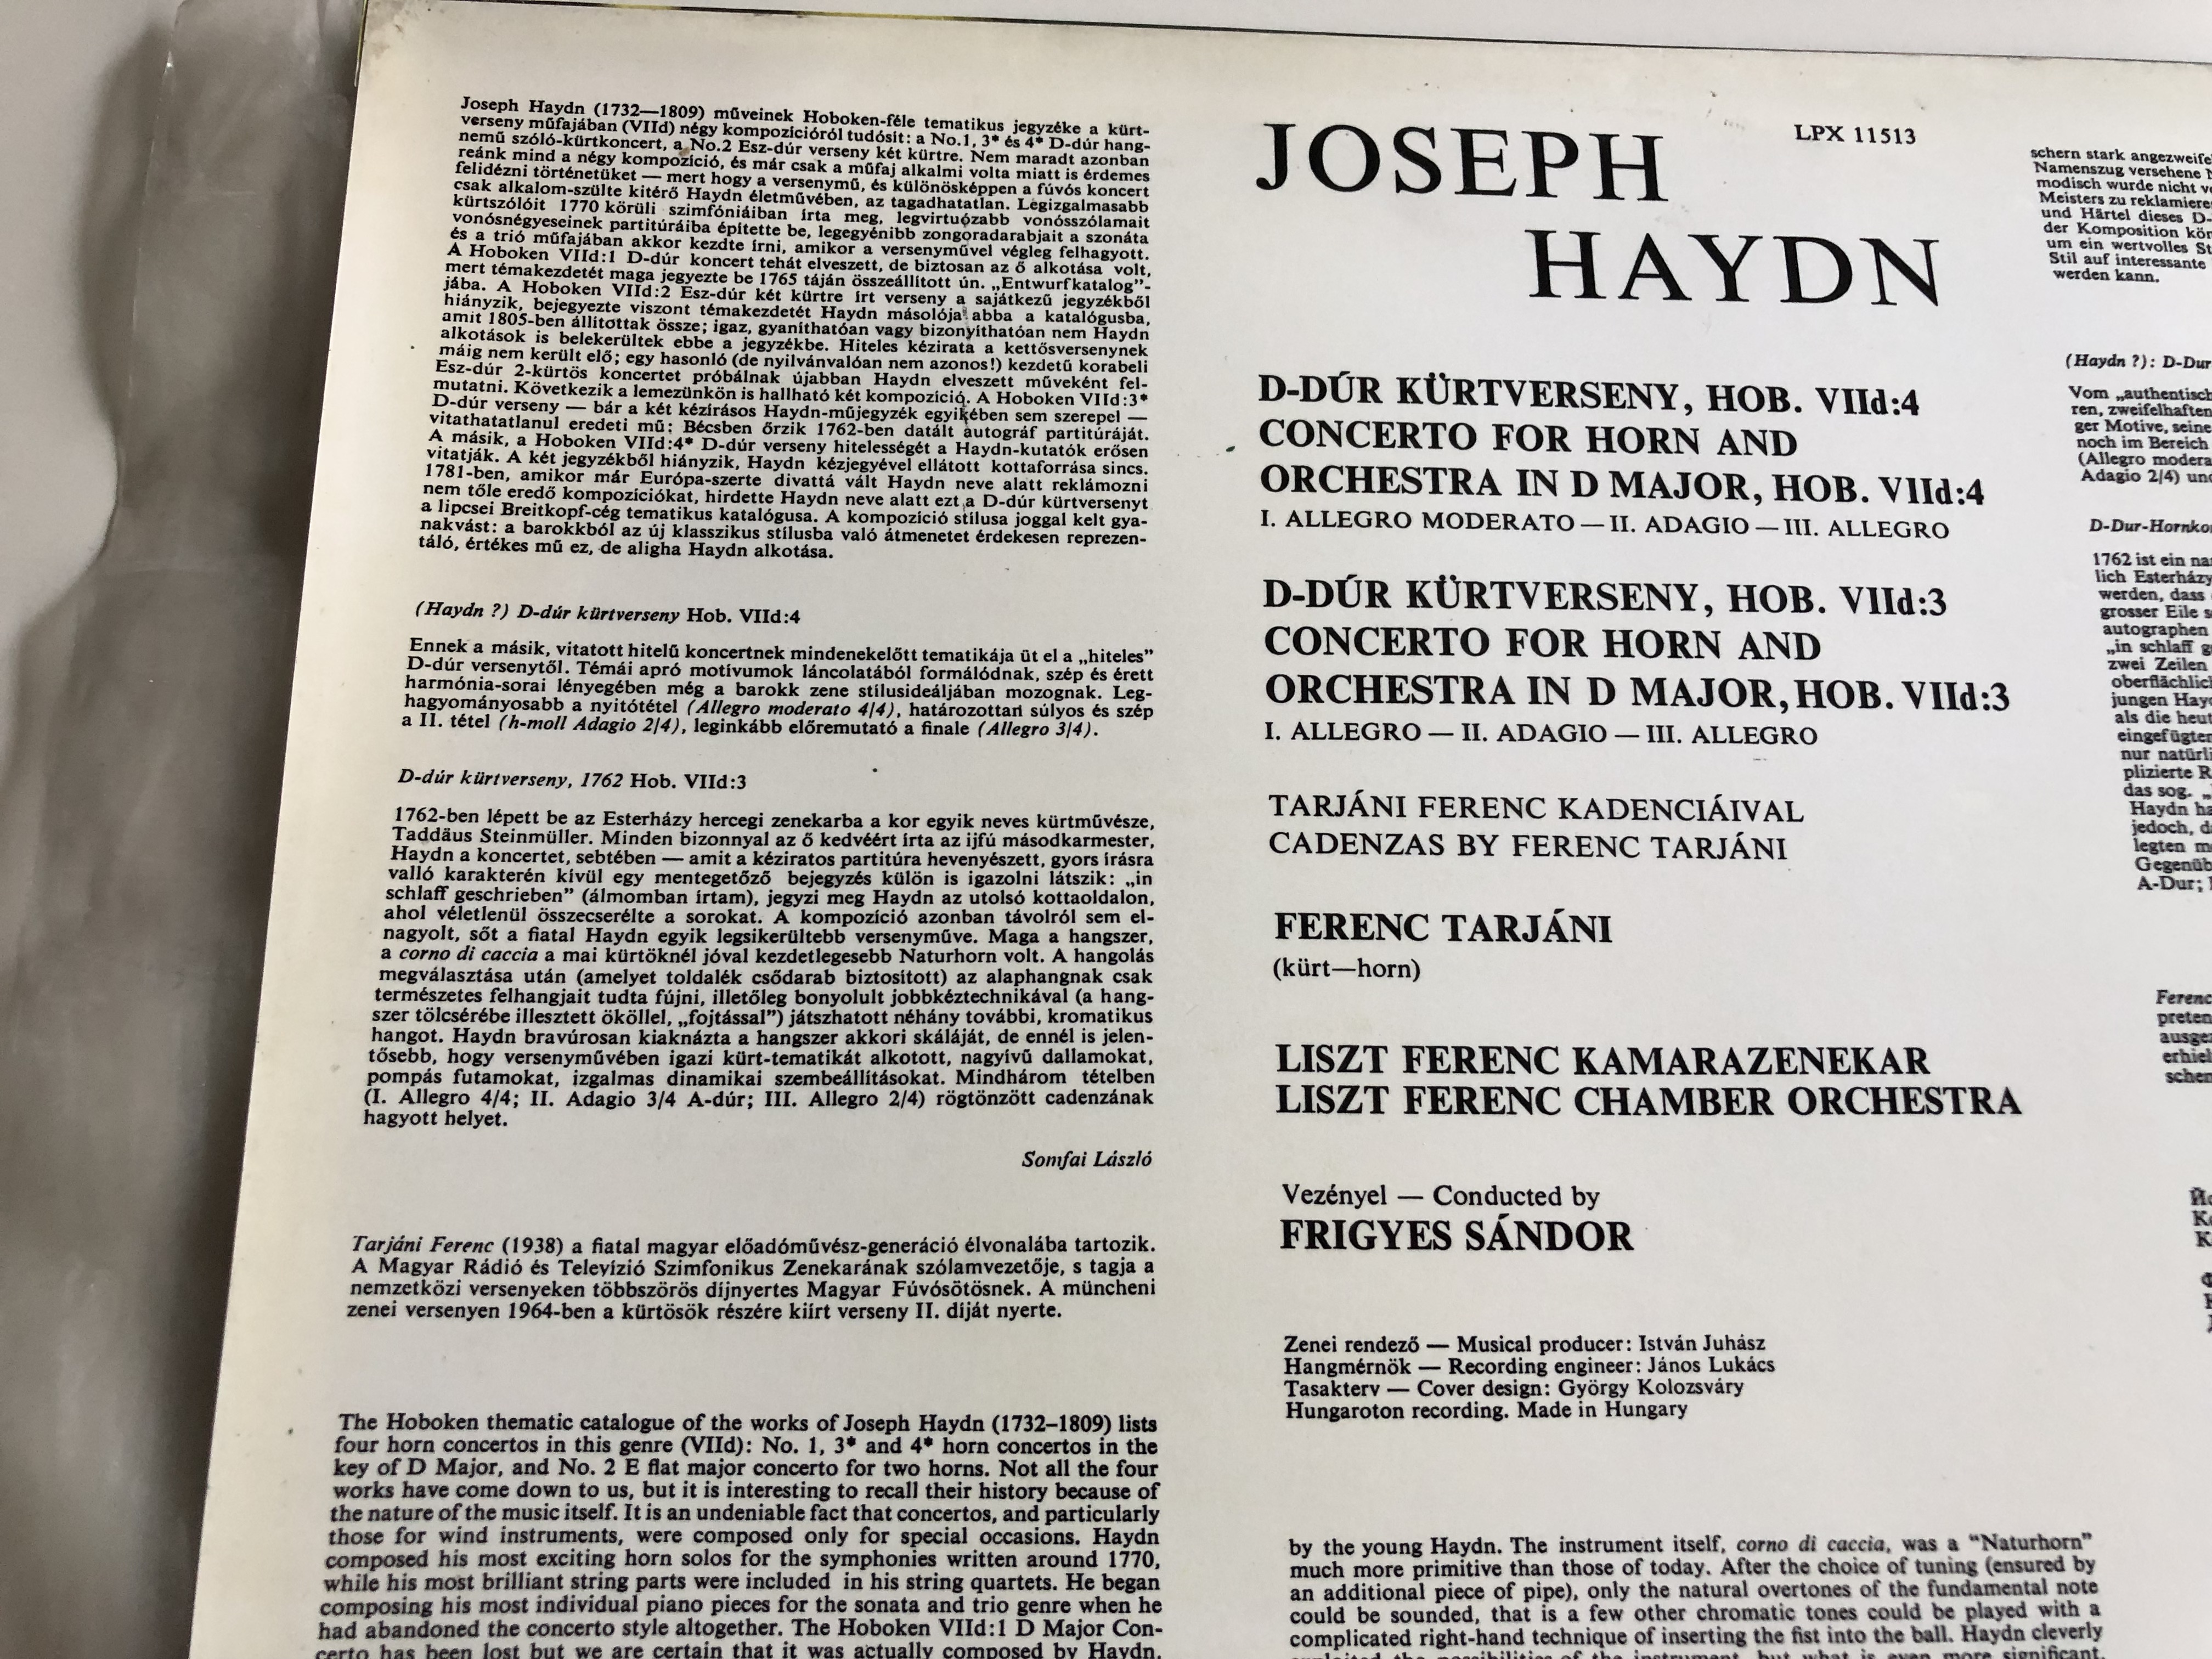 j.haydn-concertos-for-horn-in-d-major-nos.-1-2-f.-tarj-ni-conducted-f.-s-ndor-liszt-ferenc-chamber-orchestra-hungaroton-lp-stereo-mono-lpx-11513-3-.jpg